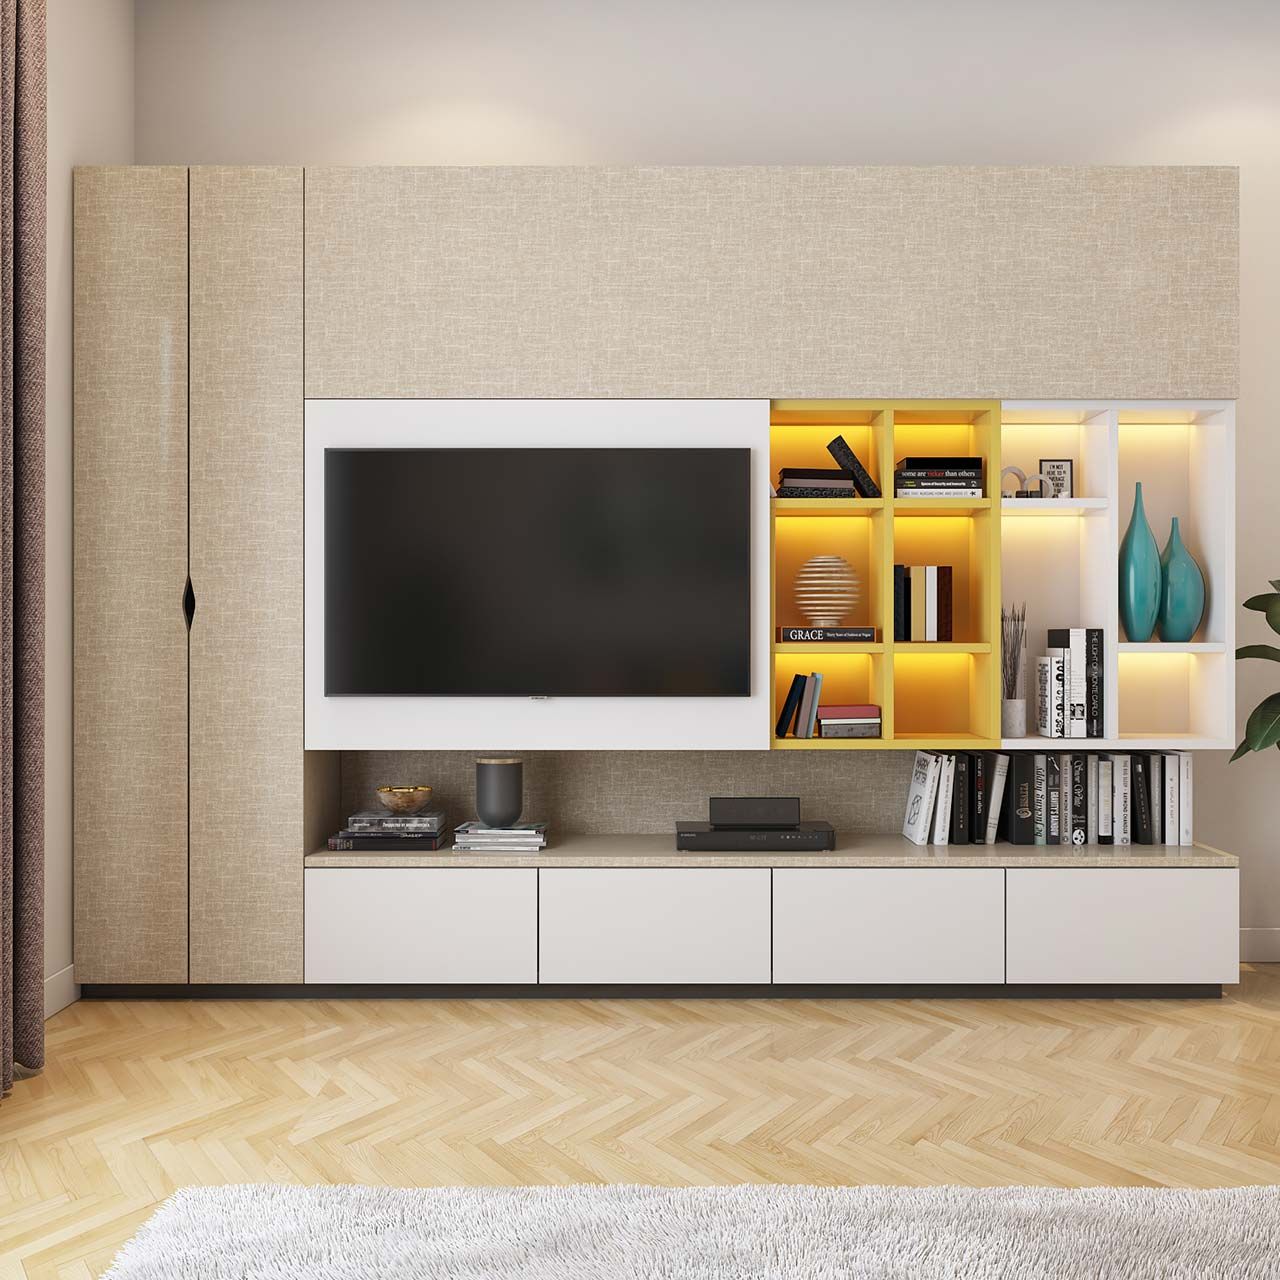 Modern Tv Unit Design Ideas For Your Home | Designcafe Regarding Dual Use Storage Cabinet Tv Stands (View 13 of 15)